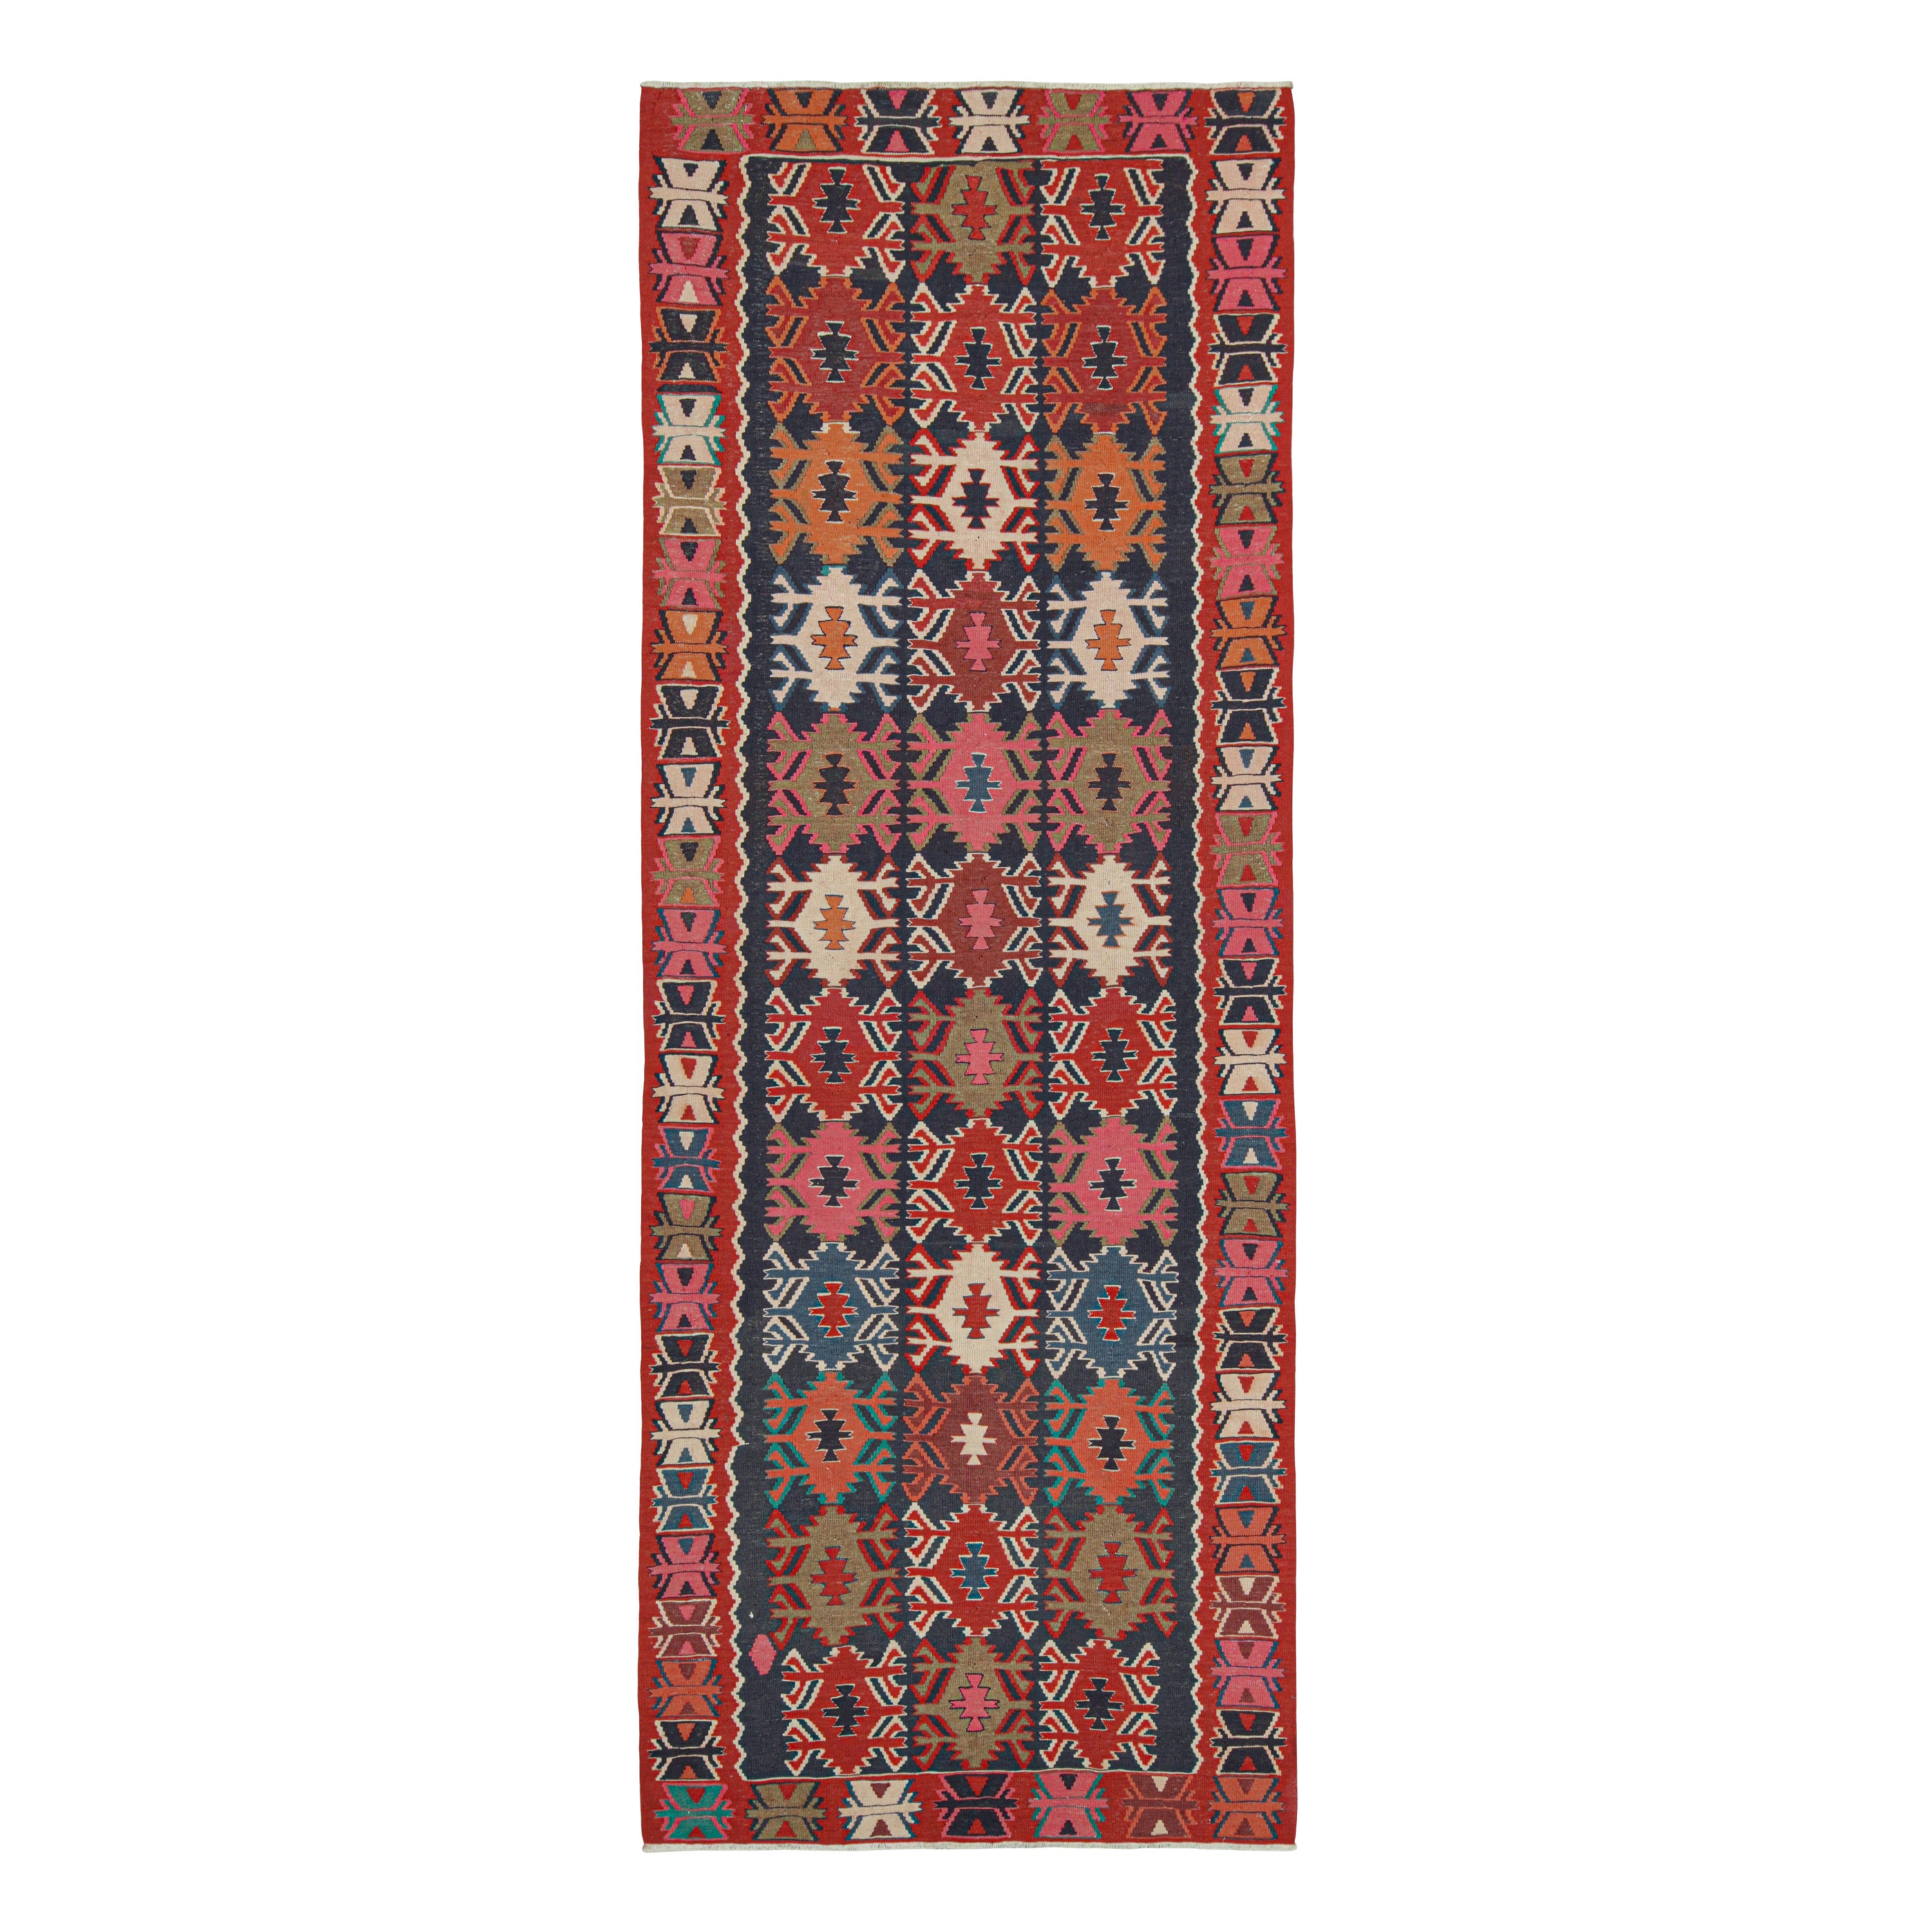 Vintage Northwest Persian Kilim with Colorful Geometric Patterns by Rug & Kilim For Sale